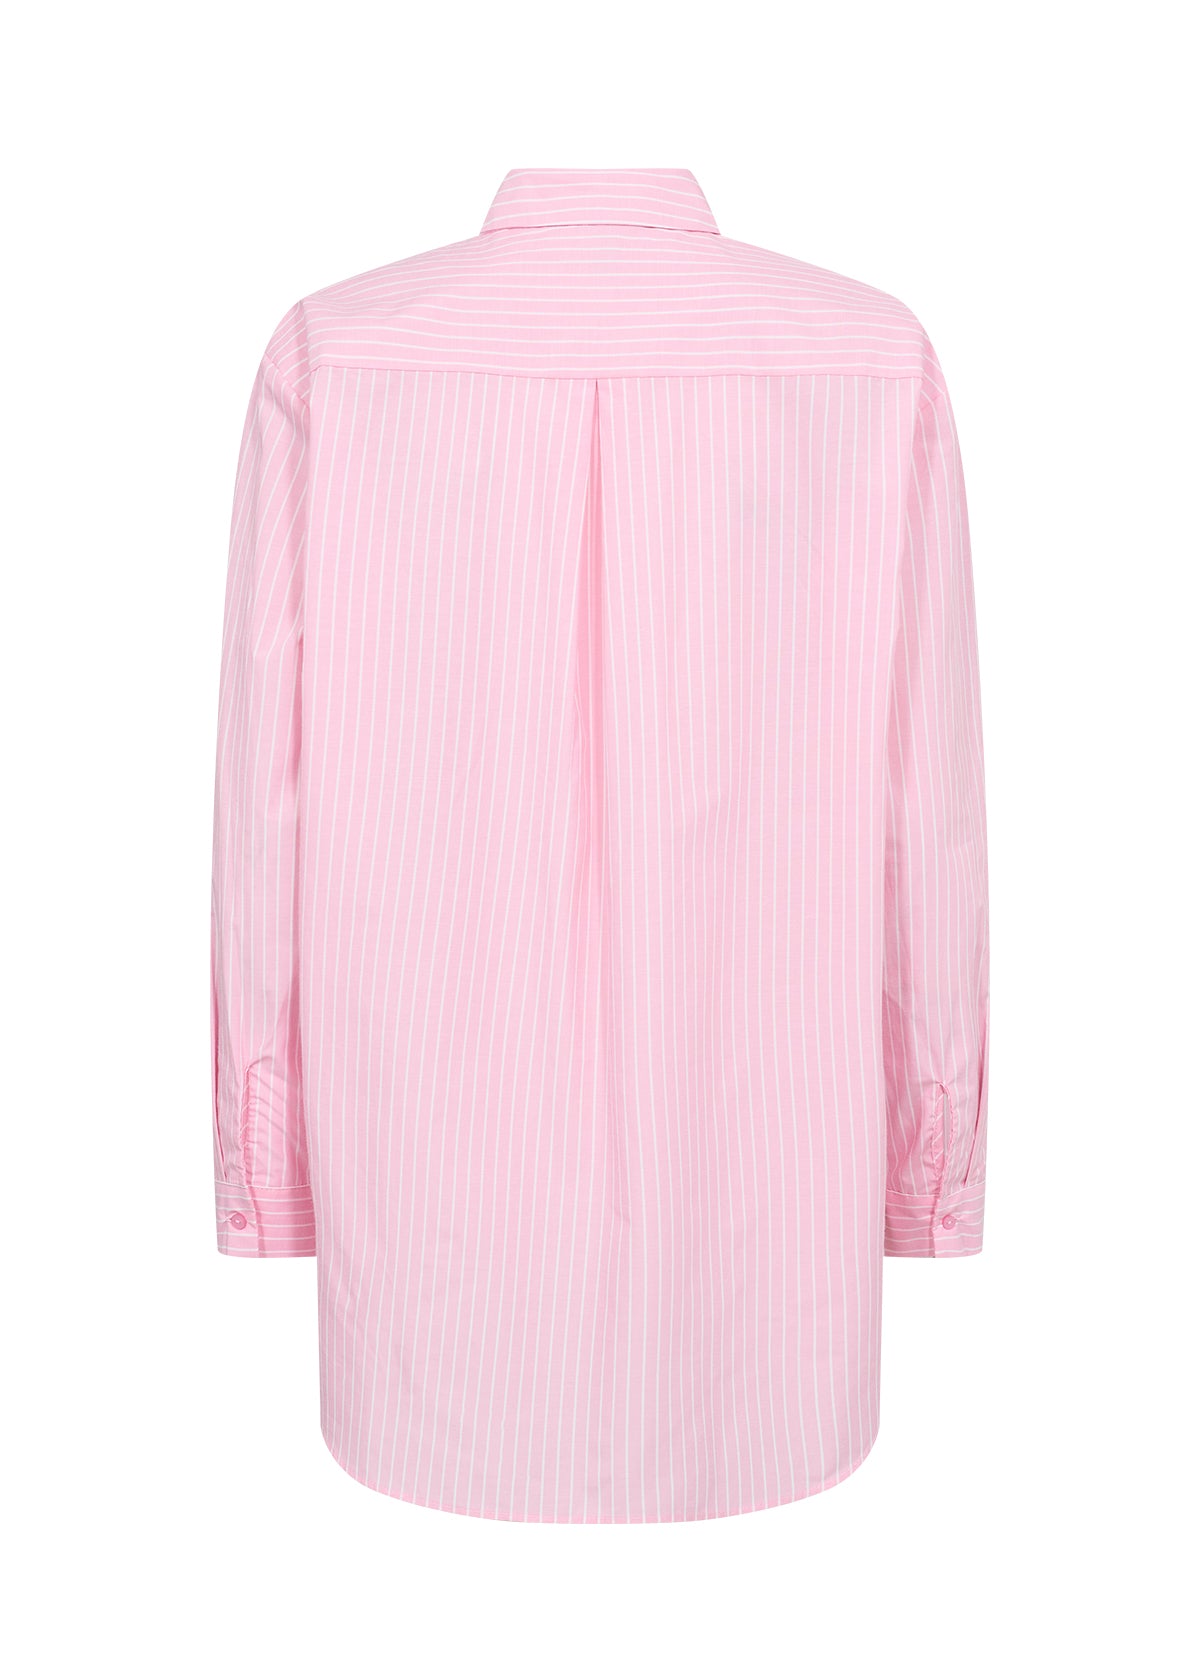 SOYA CONCEPT Dicle 2 Classic Oversized Pink & White Striped Blouse